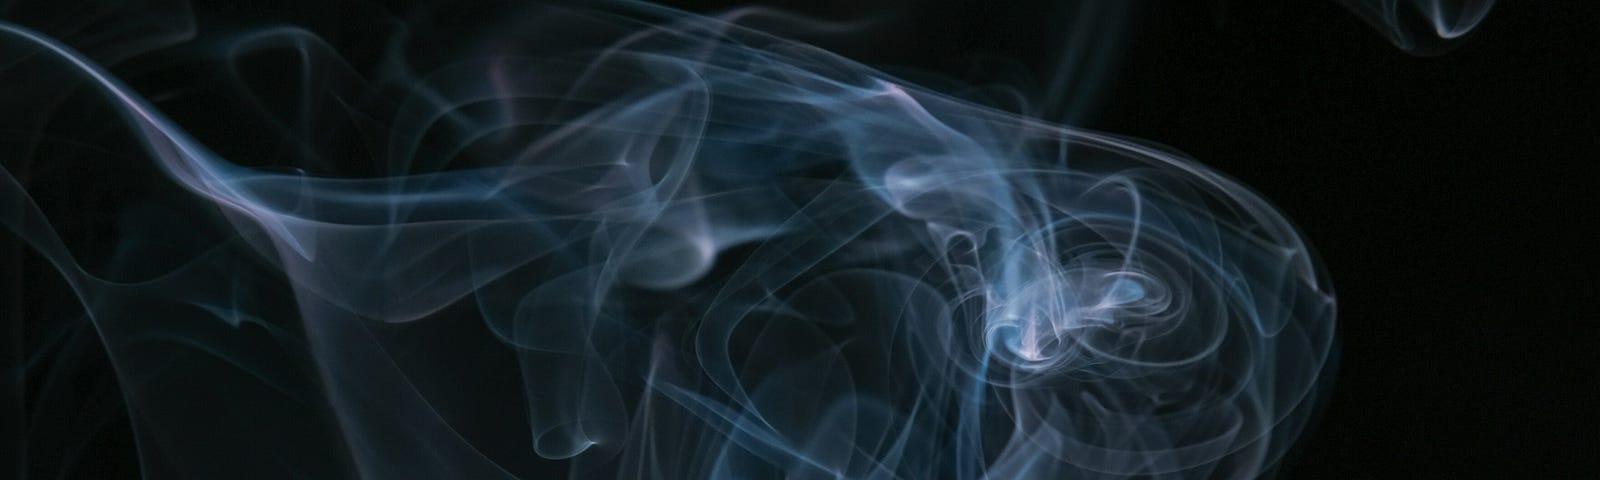 Wisps of rising blue-white smoke front a black background.